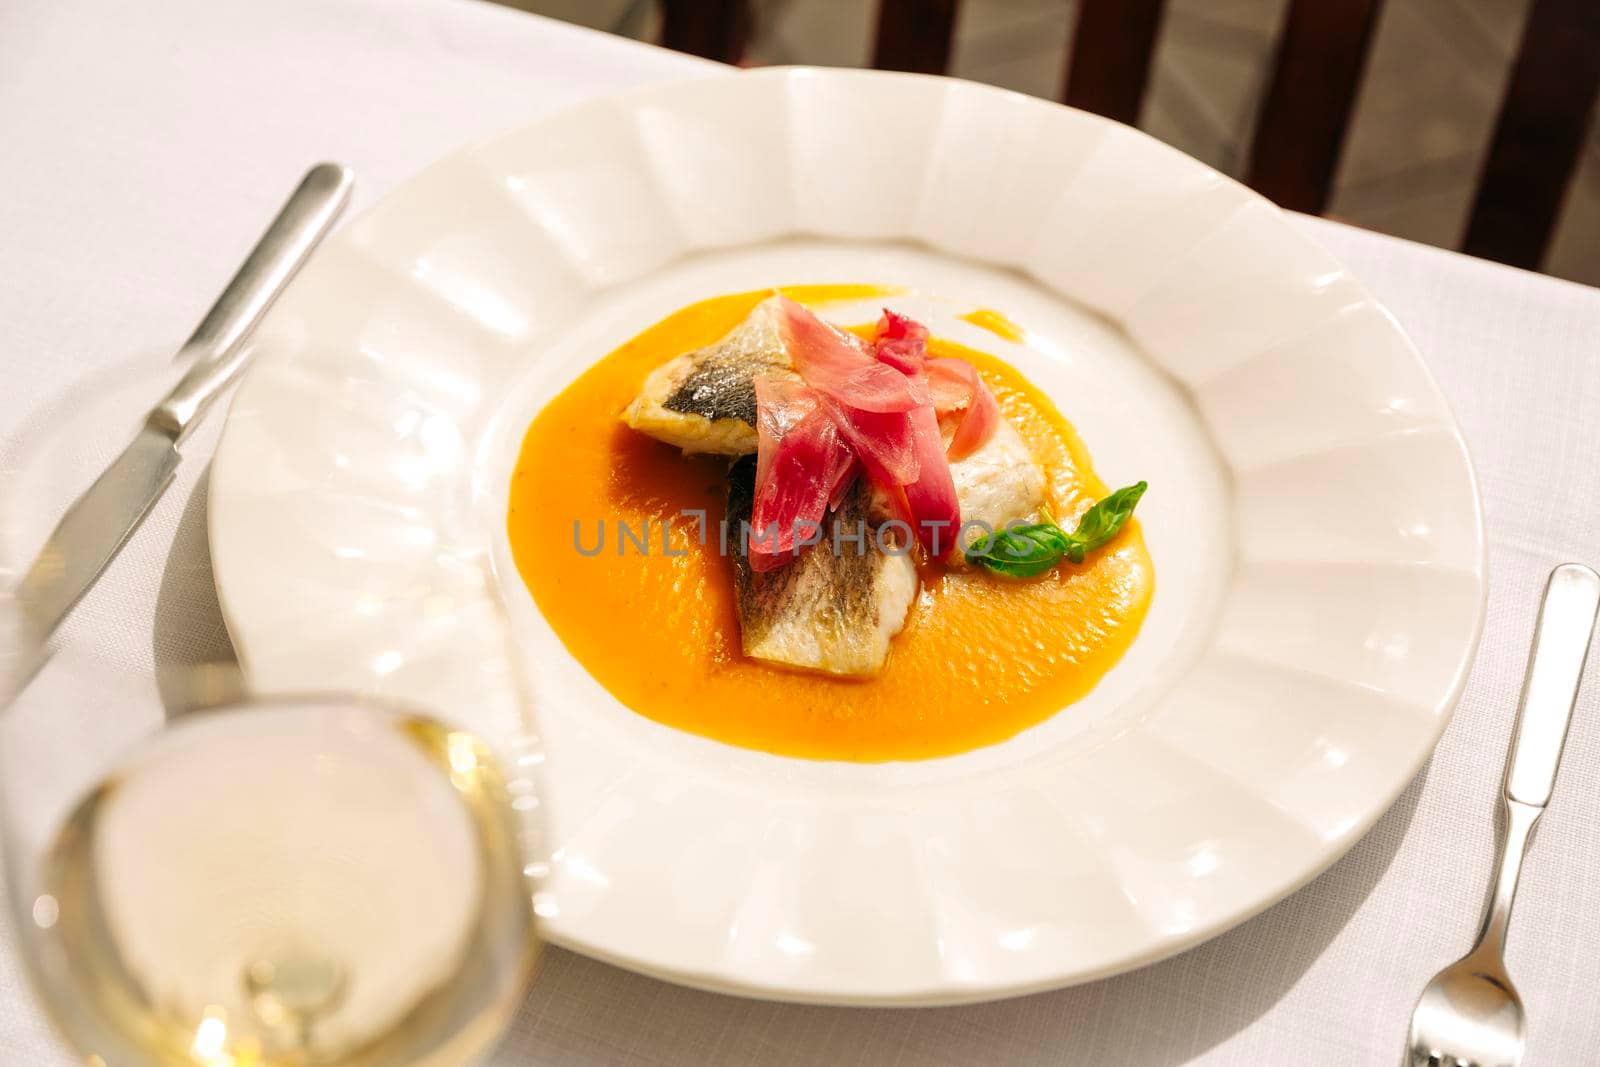 A dish in a restaurant in Venice. Sea bass steak in yellow stew with caramelized onions.